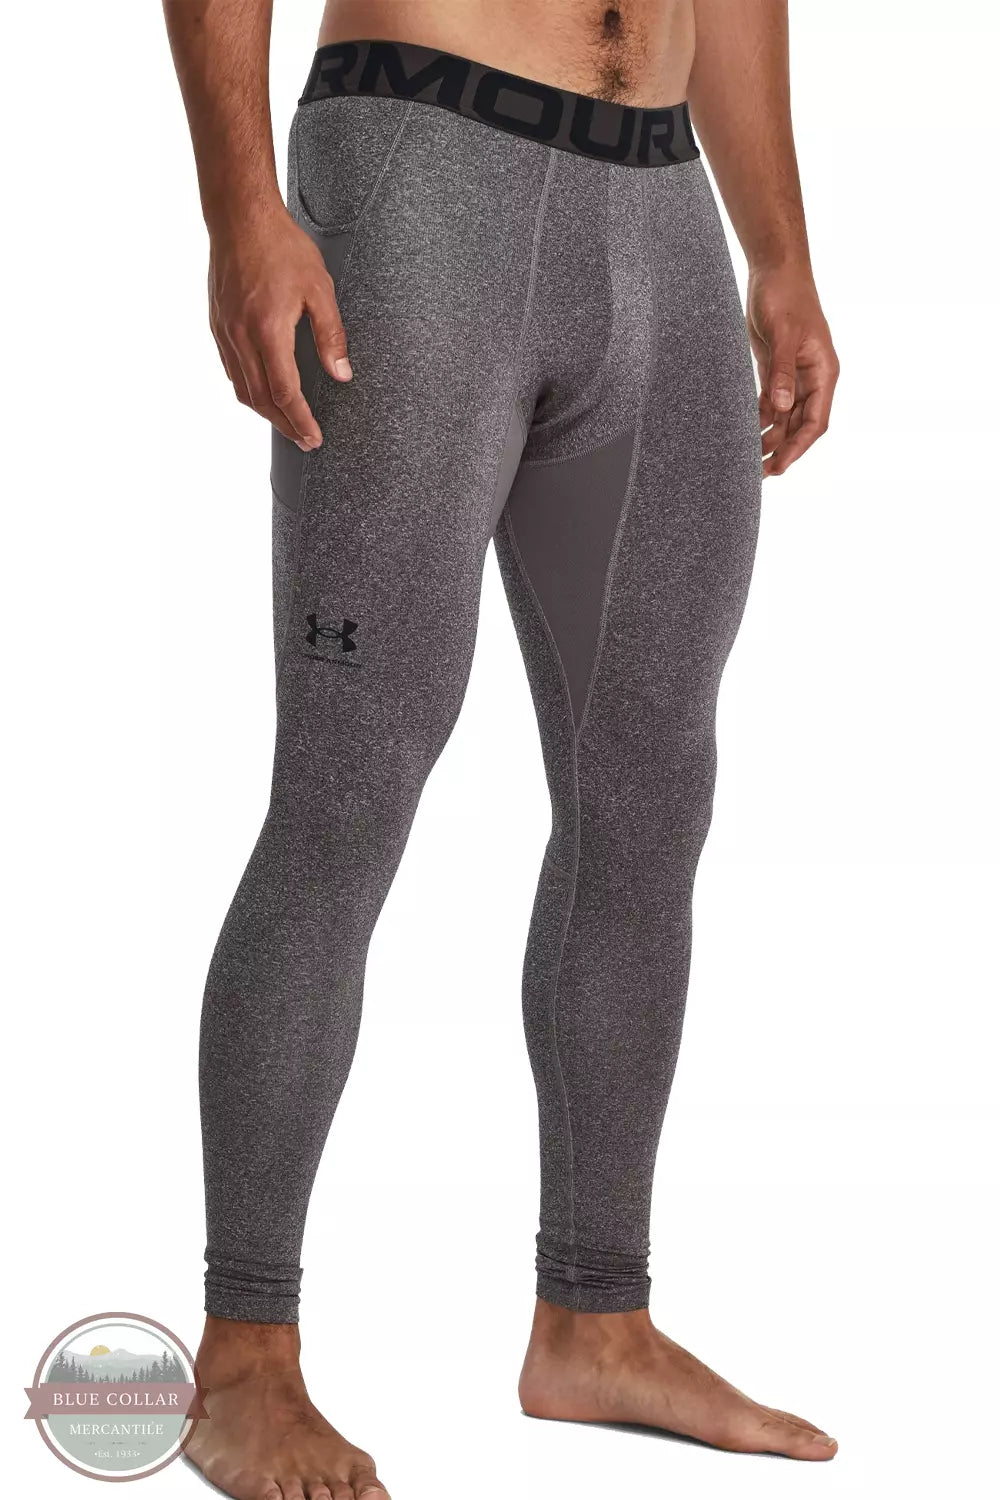 Under Armour Cold Gear Printed Leggings Black/Halo Gray 1360575-001 - Free  Shipping at LASC